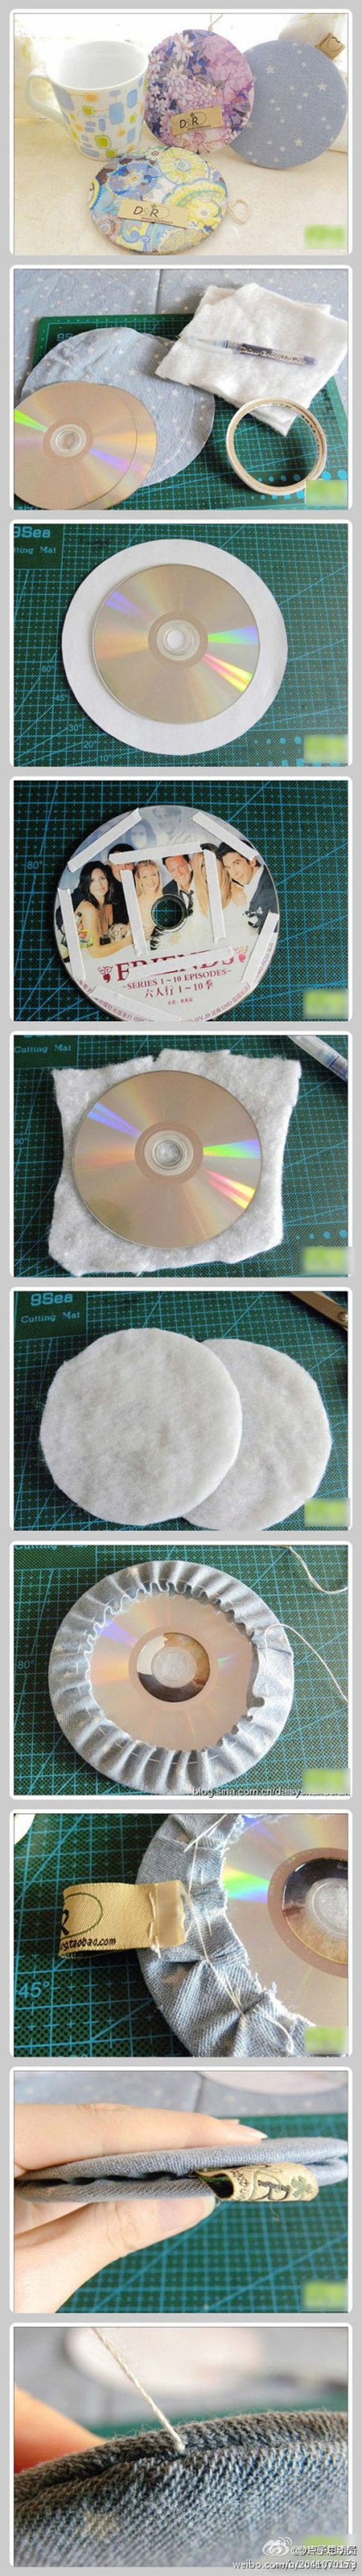 Amazing-Things-You-Never-Knew-You-Could-Do-With-Old-Cds